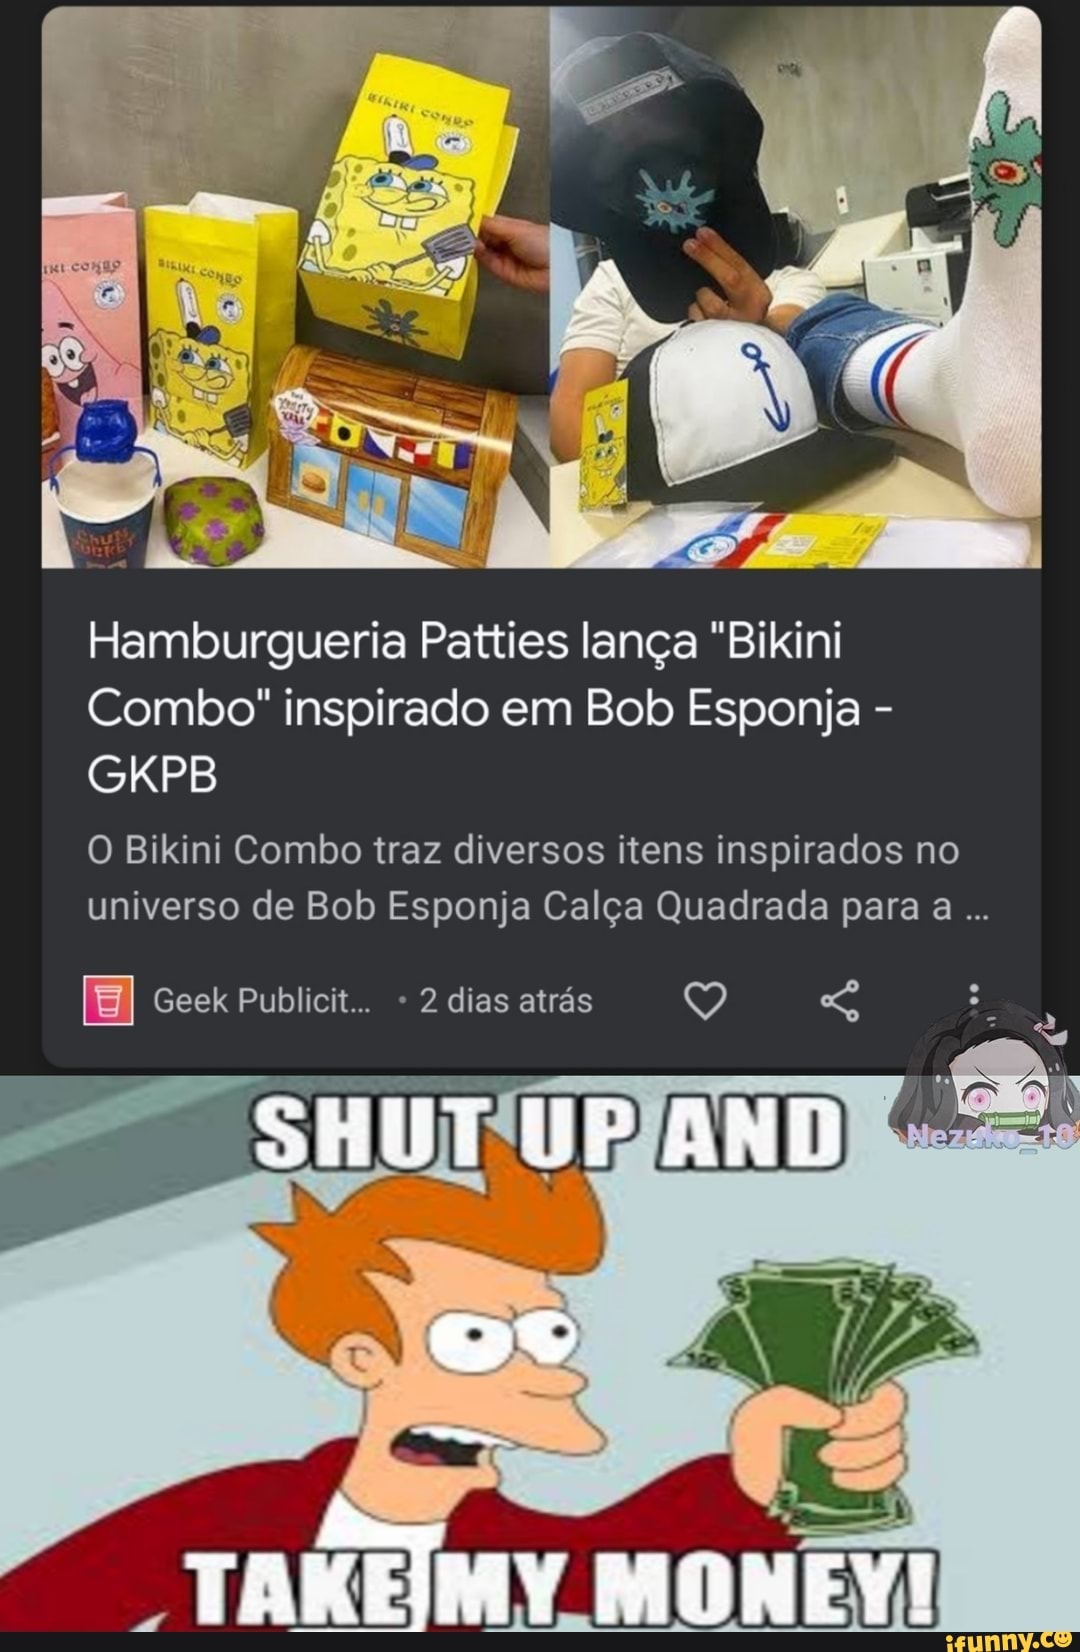 A ' Iloavea meme How I make it a crossover ow ongina Daring loday and  shitpost areviwe Thanks Krusty Krab _No this is Patrick - iFunny Brazil